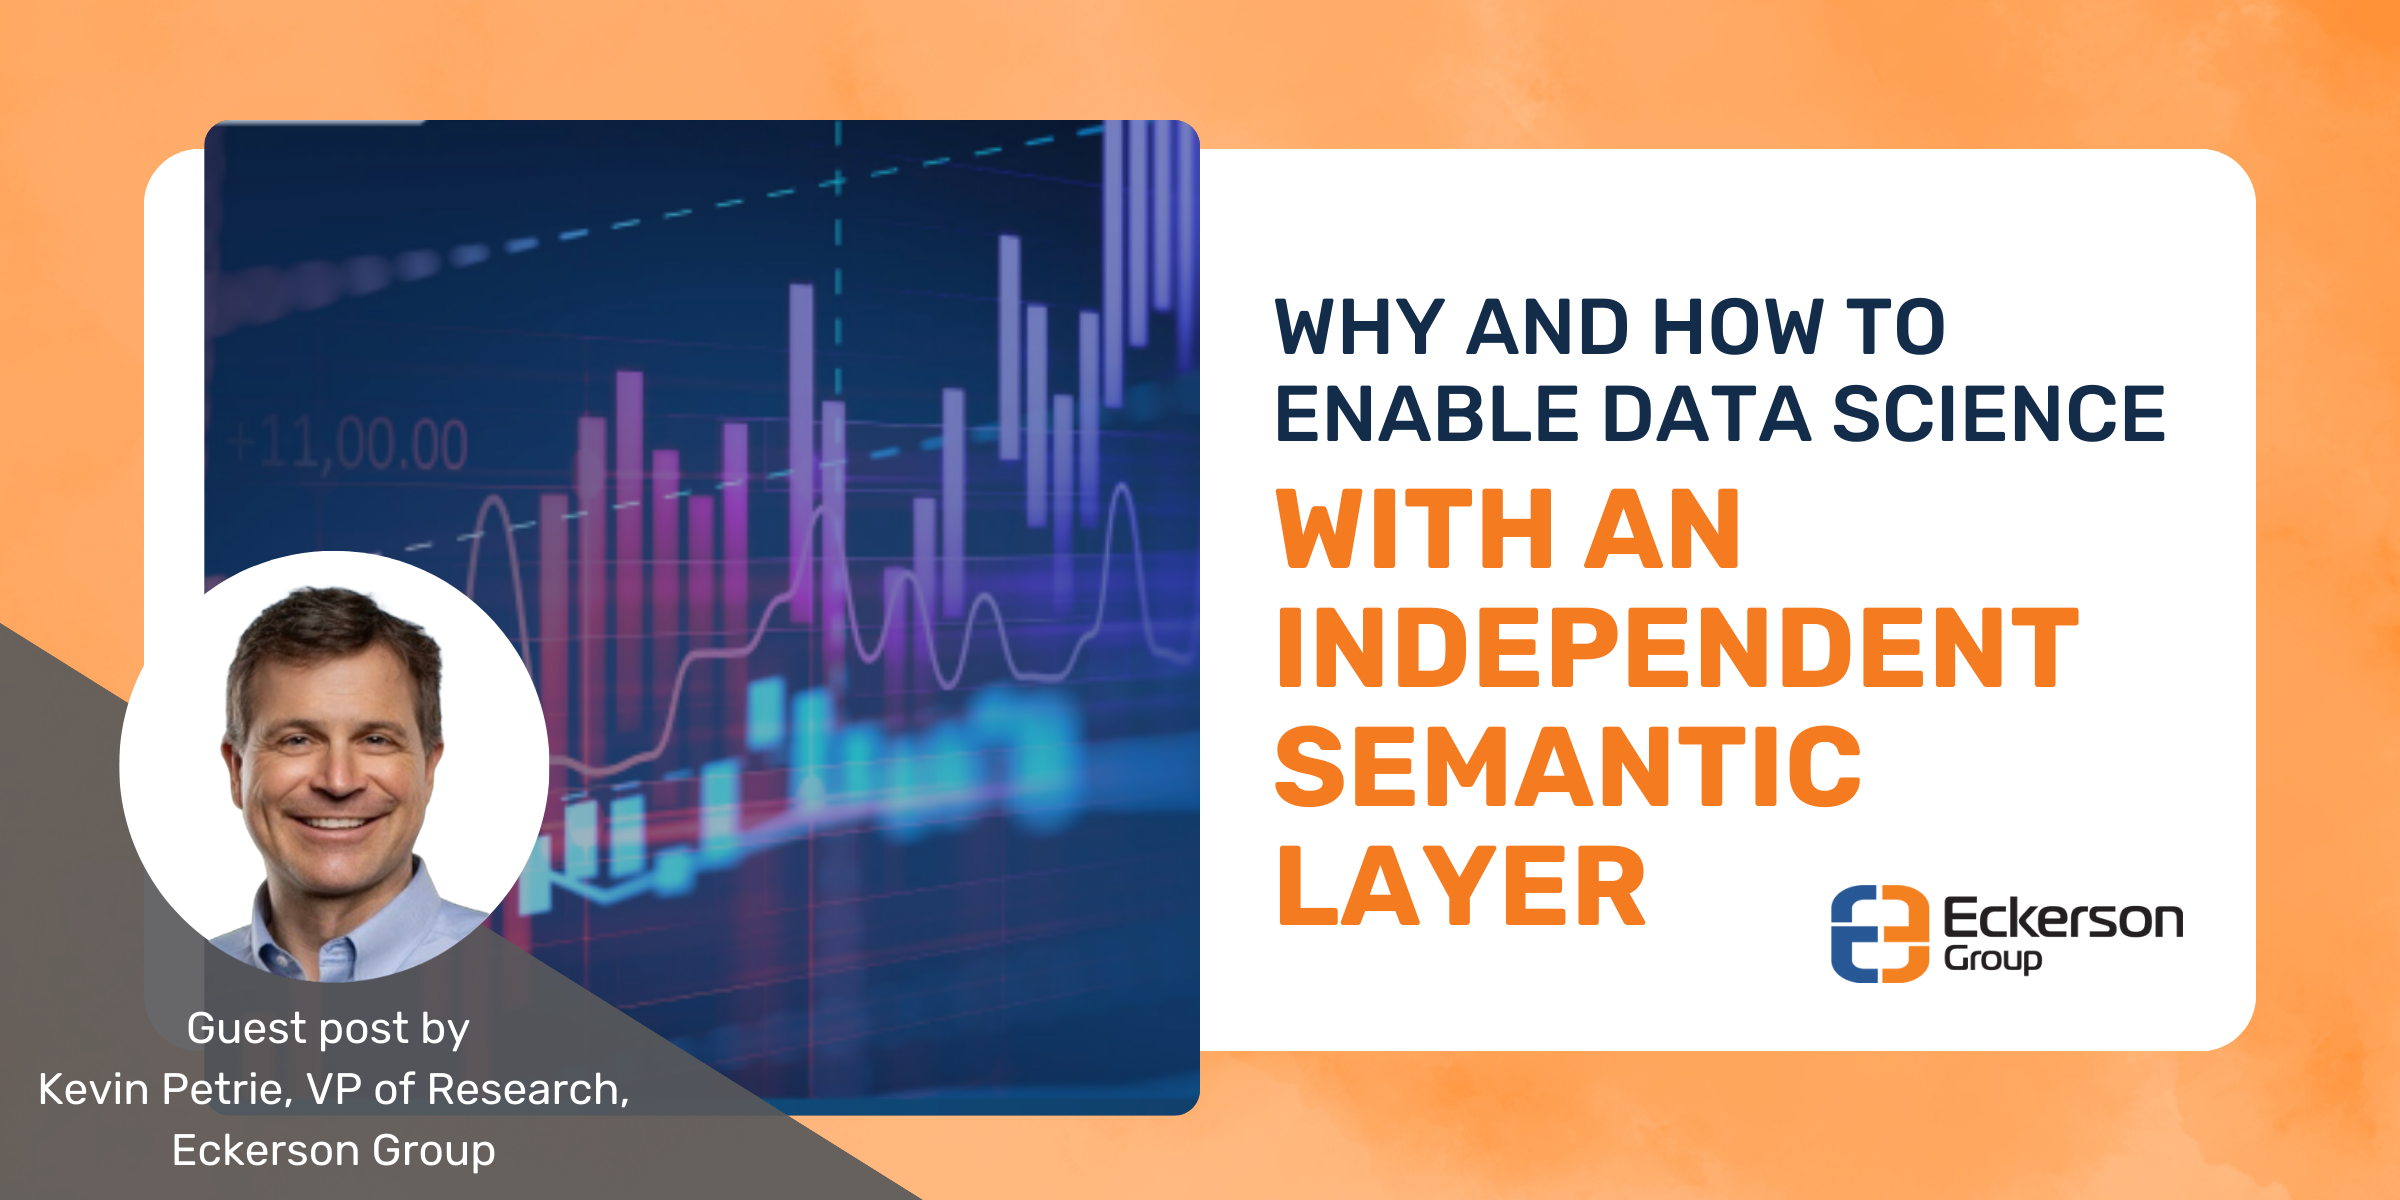 Why and how to enable data science with an independent semantic layer